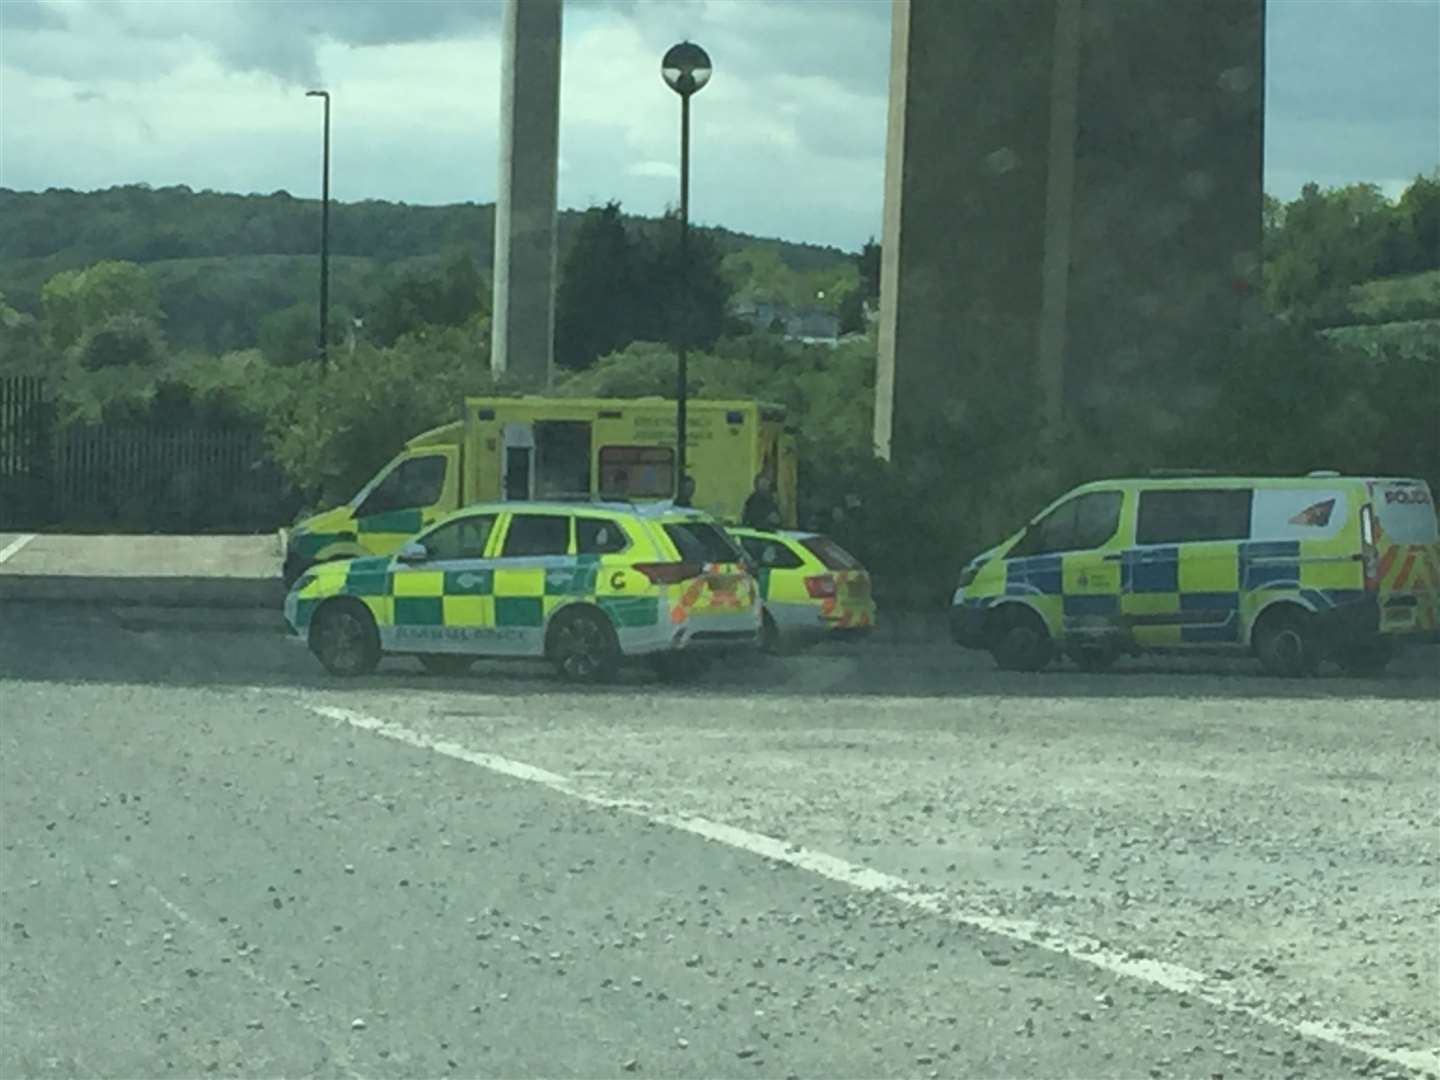 Police and paramedics were seen in the Cineworld car park in Rochester